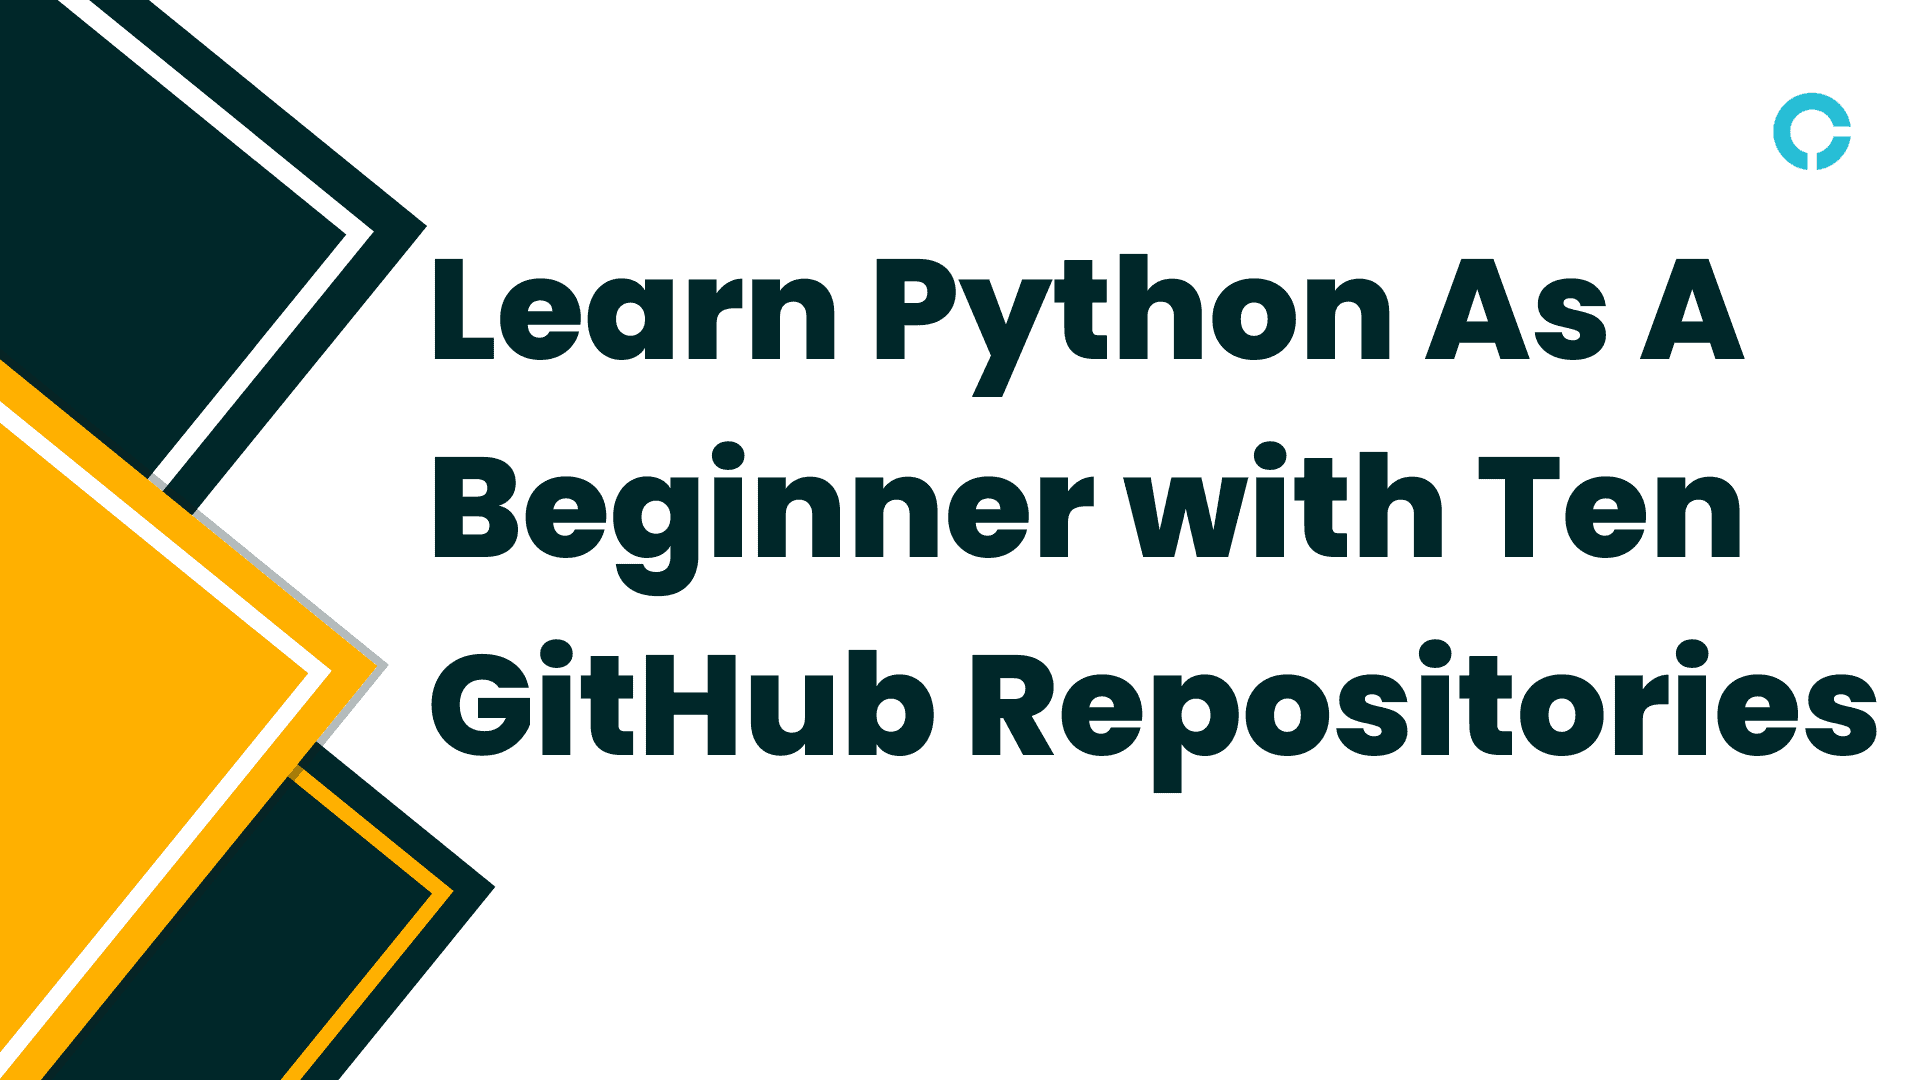 learn-python-as-a-beginner-with-10-github-repositories